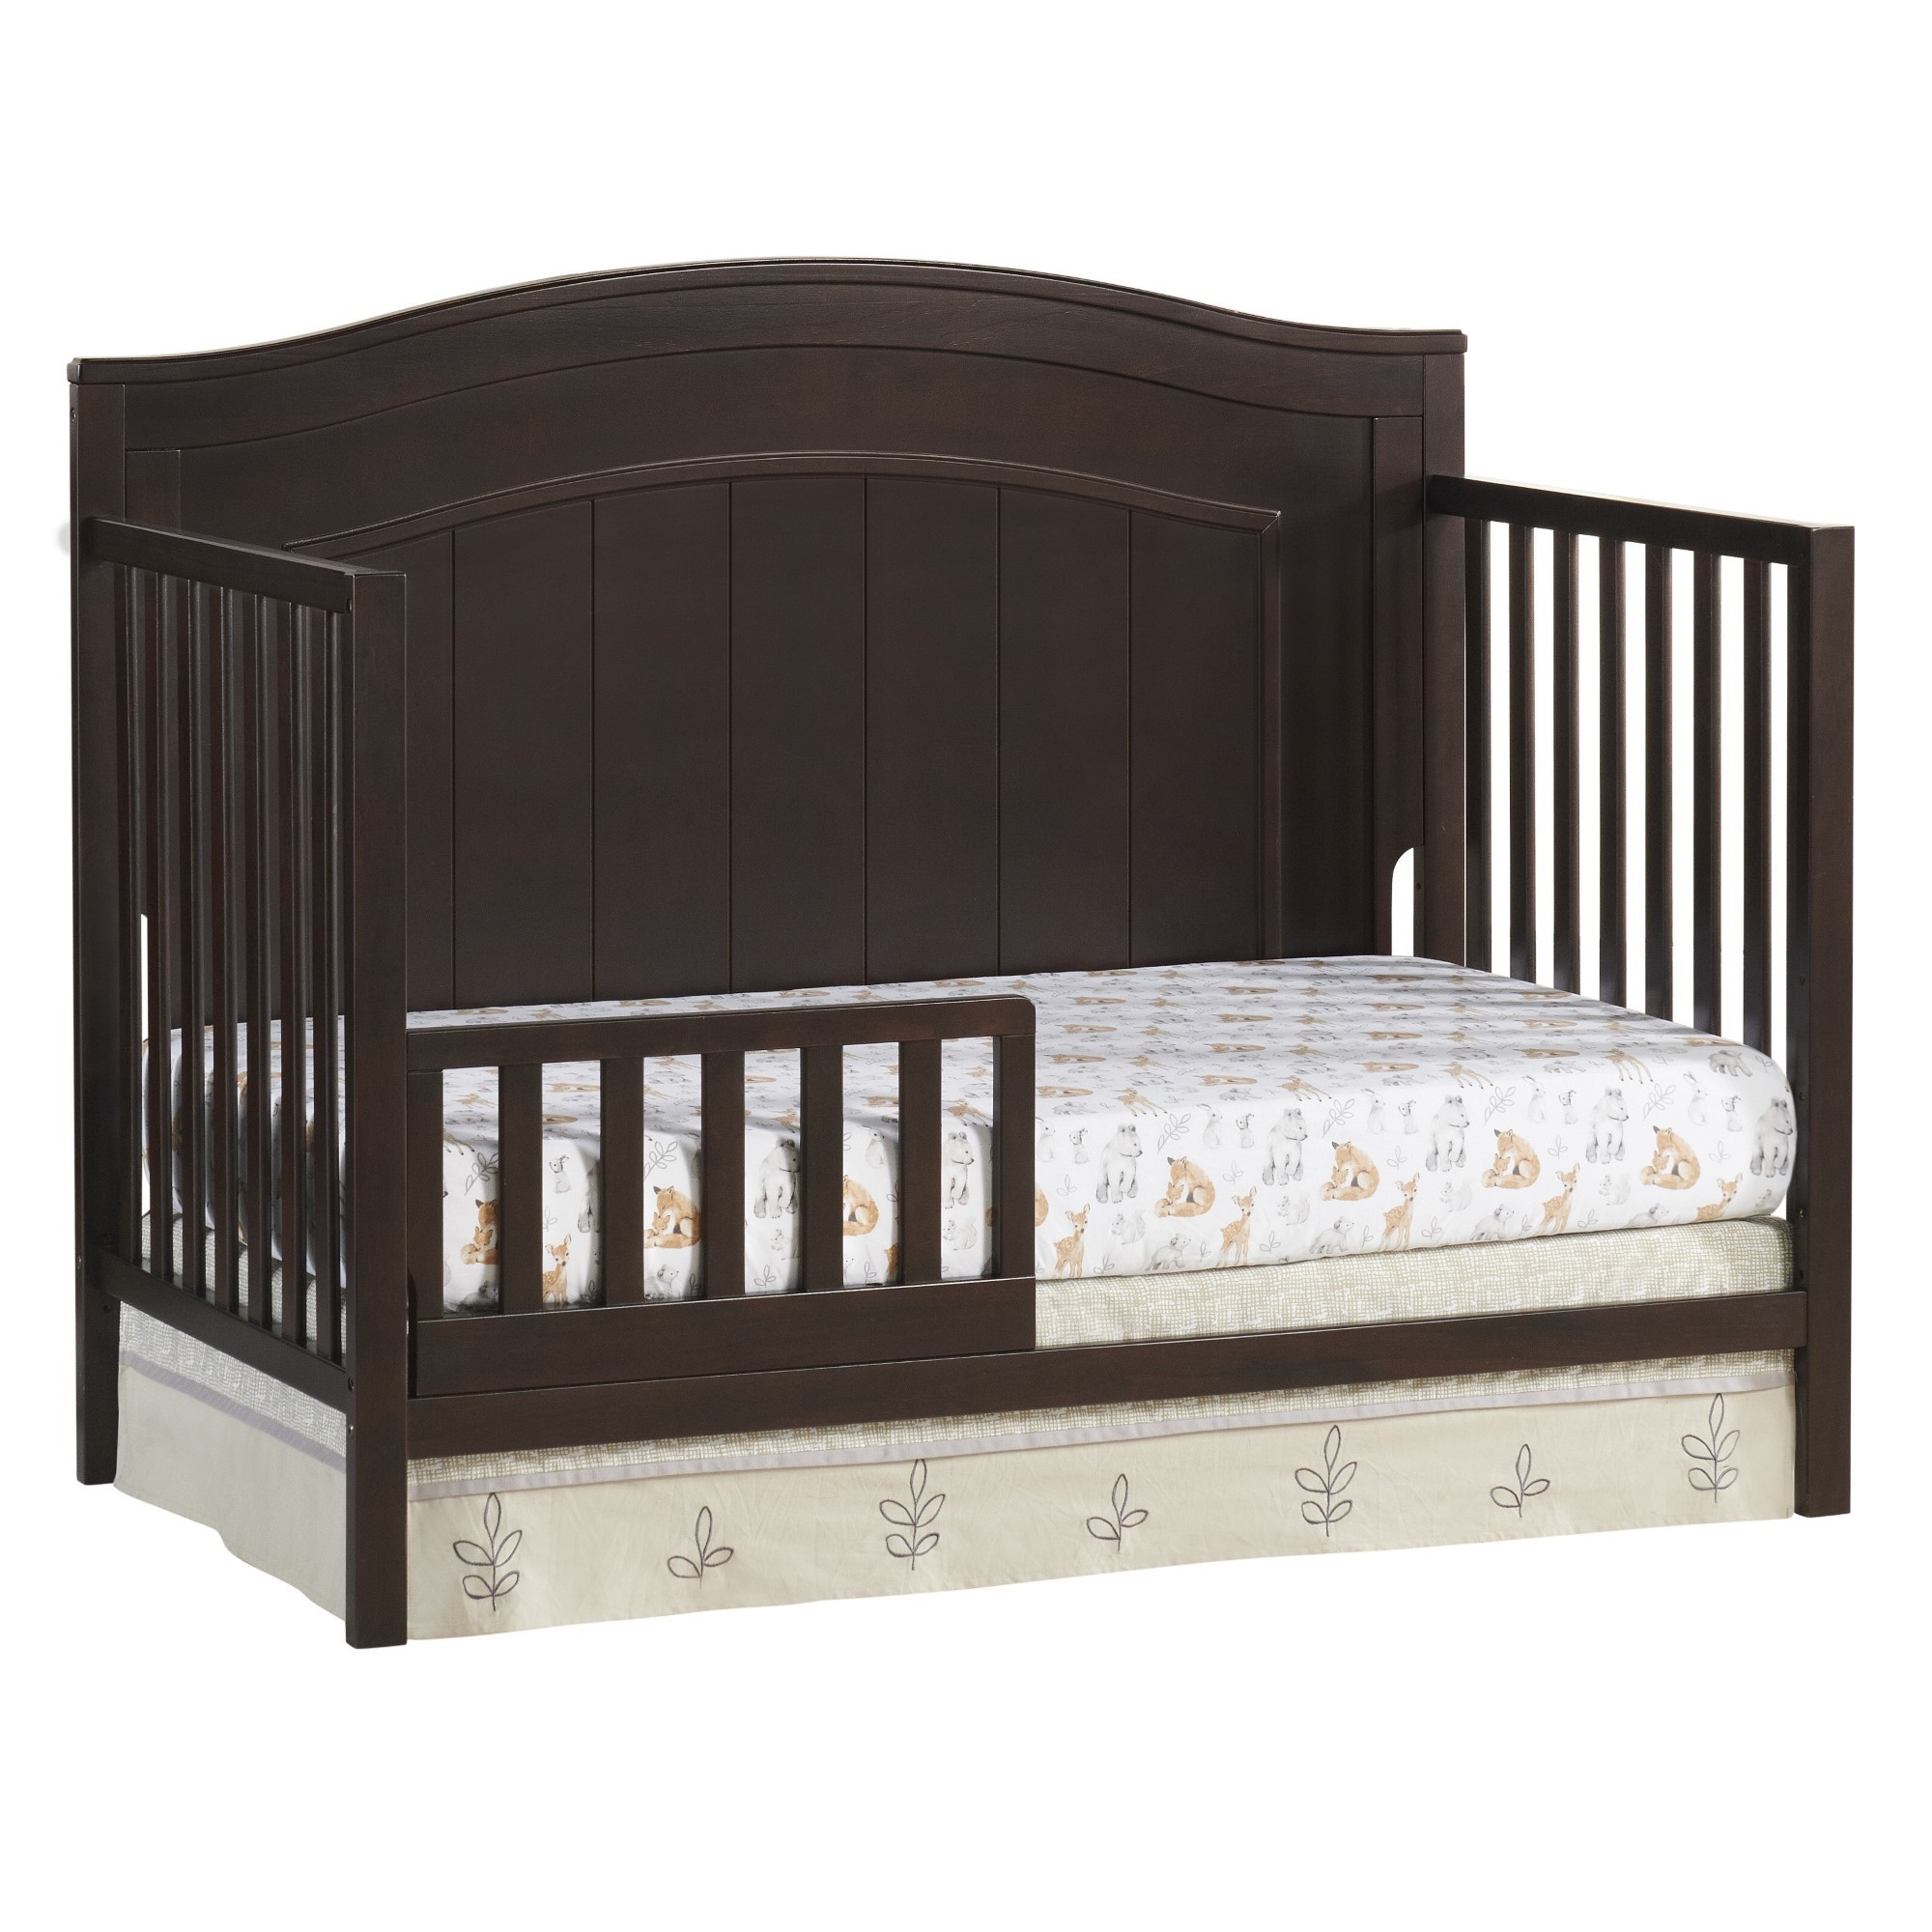 Oxford Baby North Bay 4-in-1 Convertible Crib, Espresso Brown, GREENGUARD Gold Certified - image 5 of 13